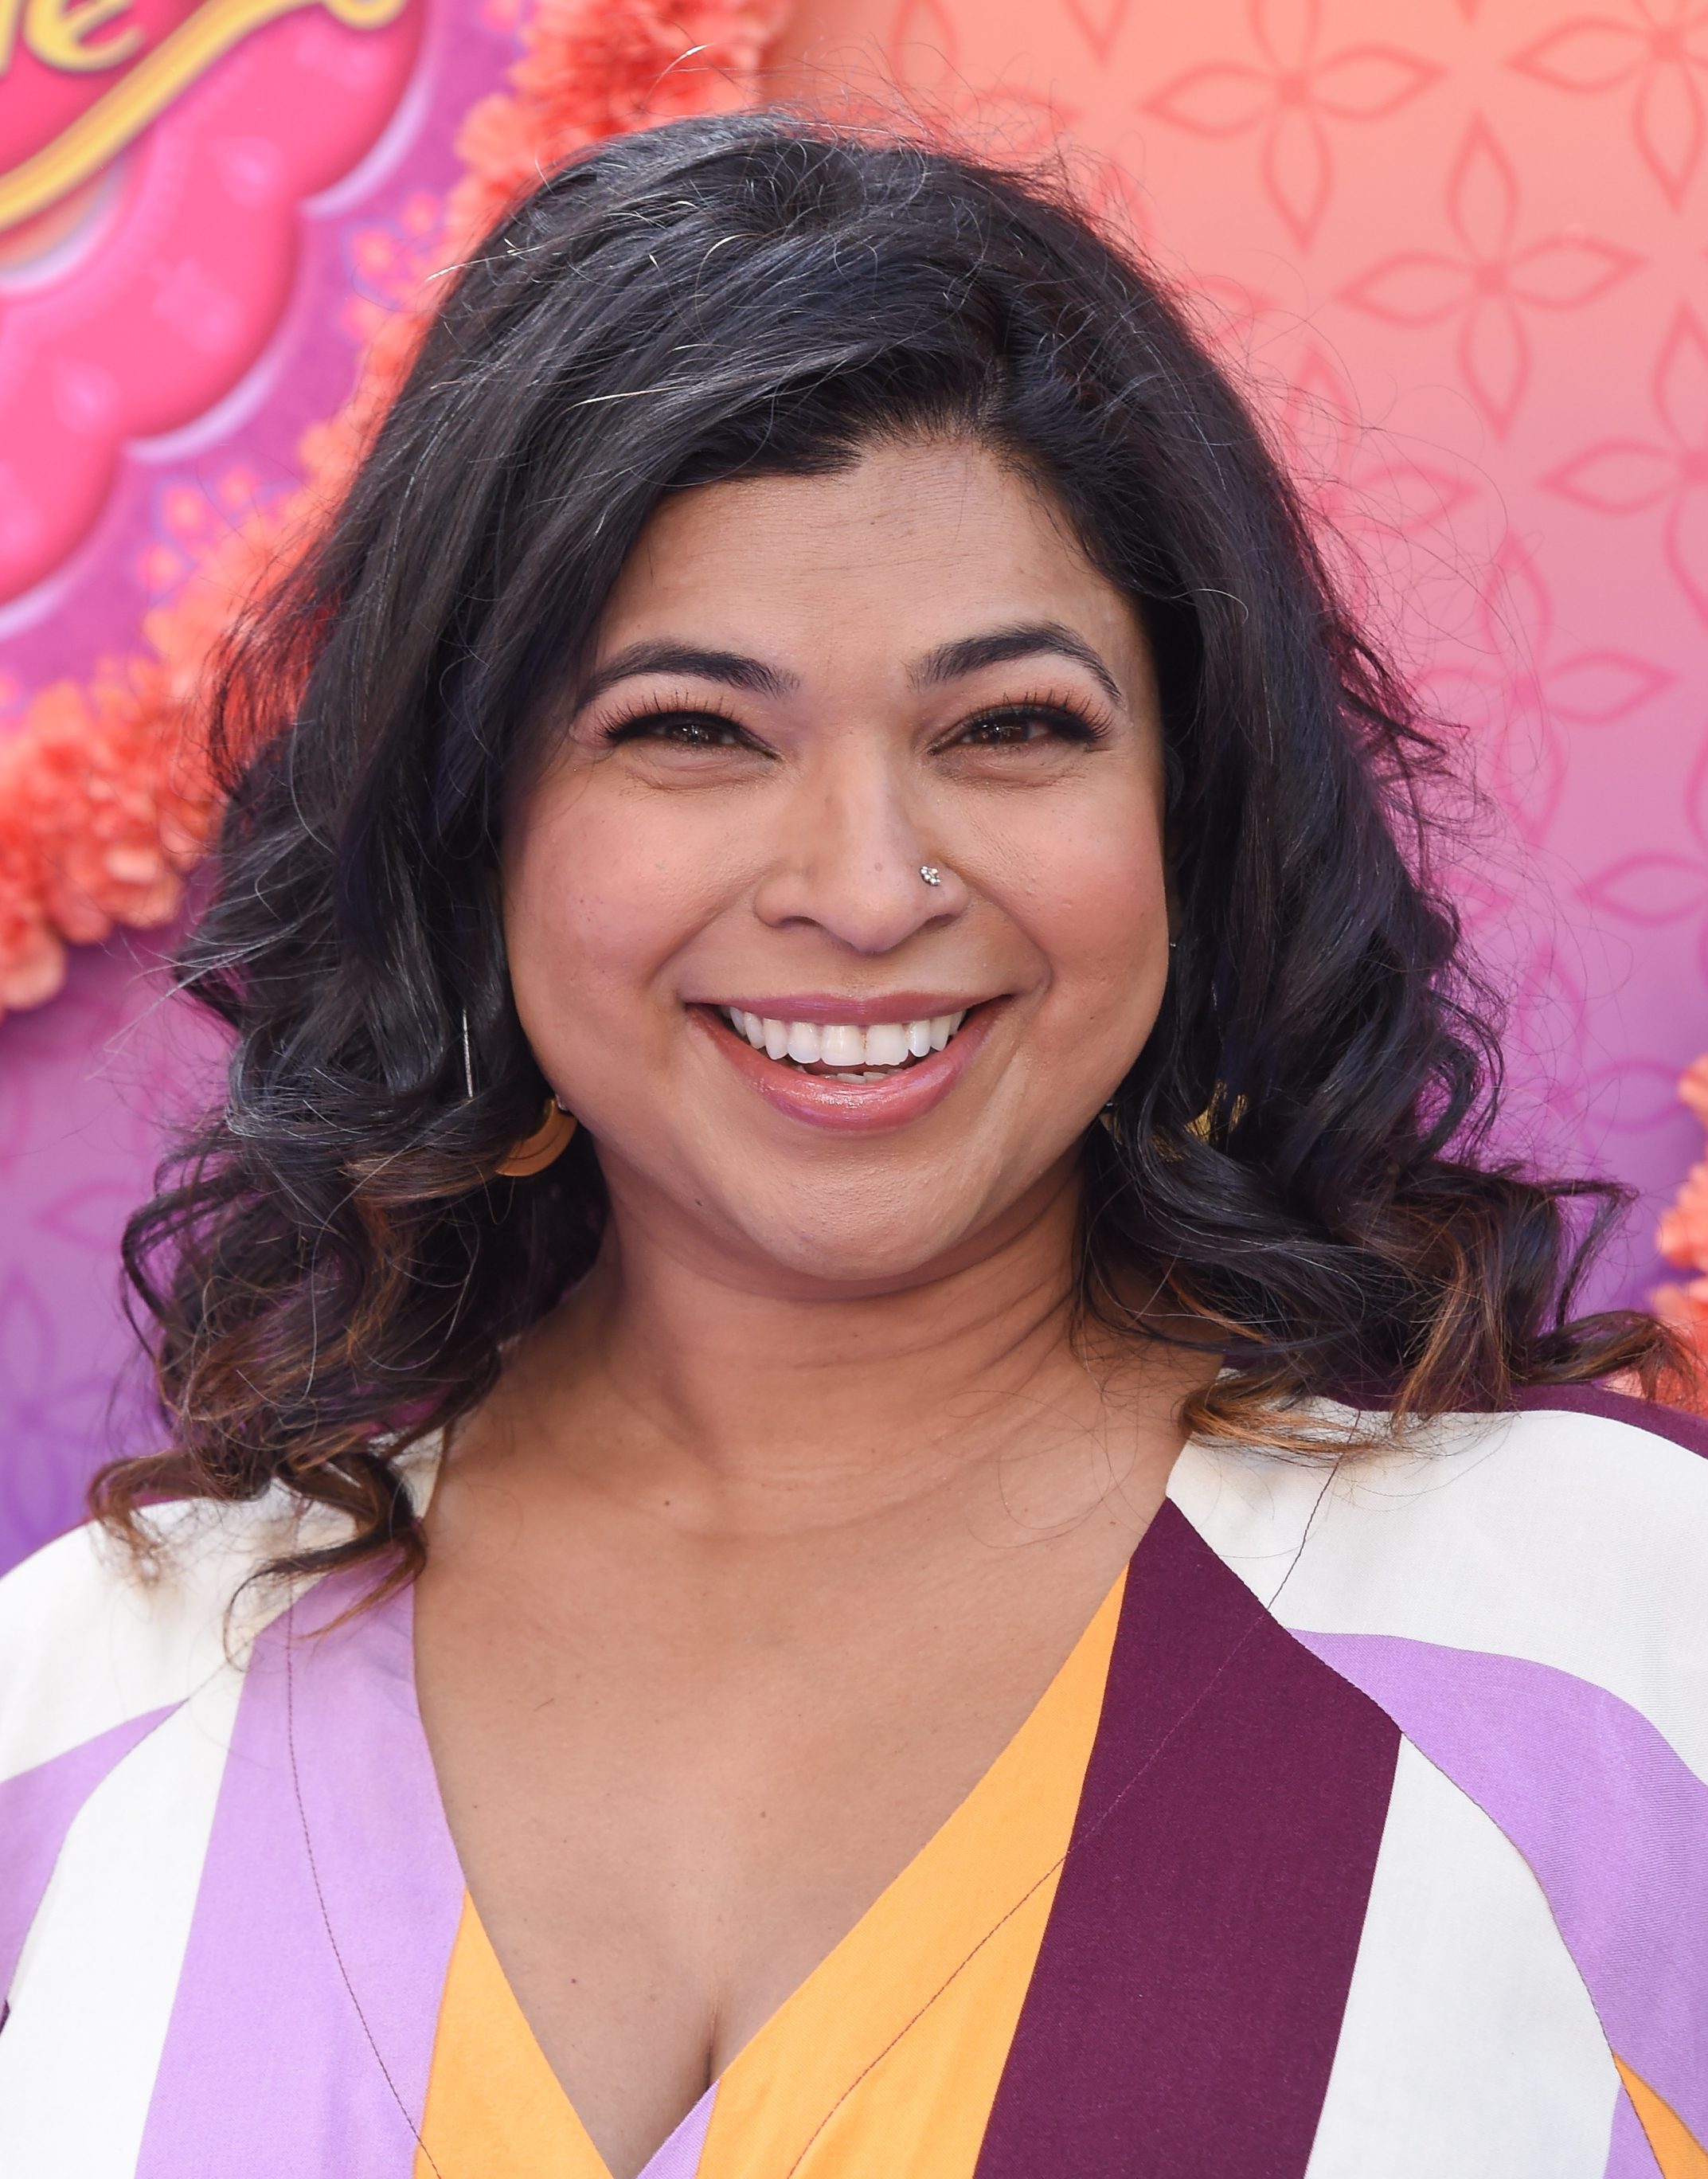  Aarti Sequeira -  Indian American Cook of Top Richest Celebrity Chefs